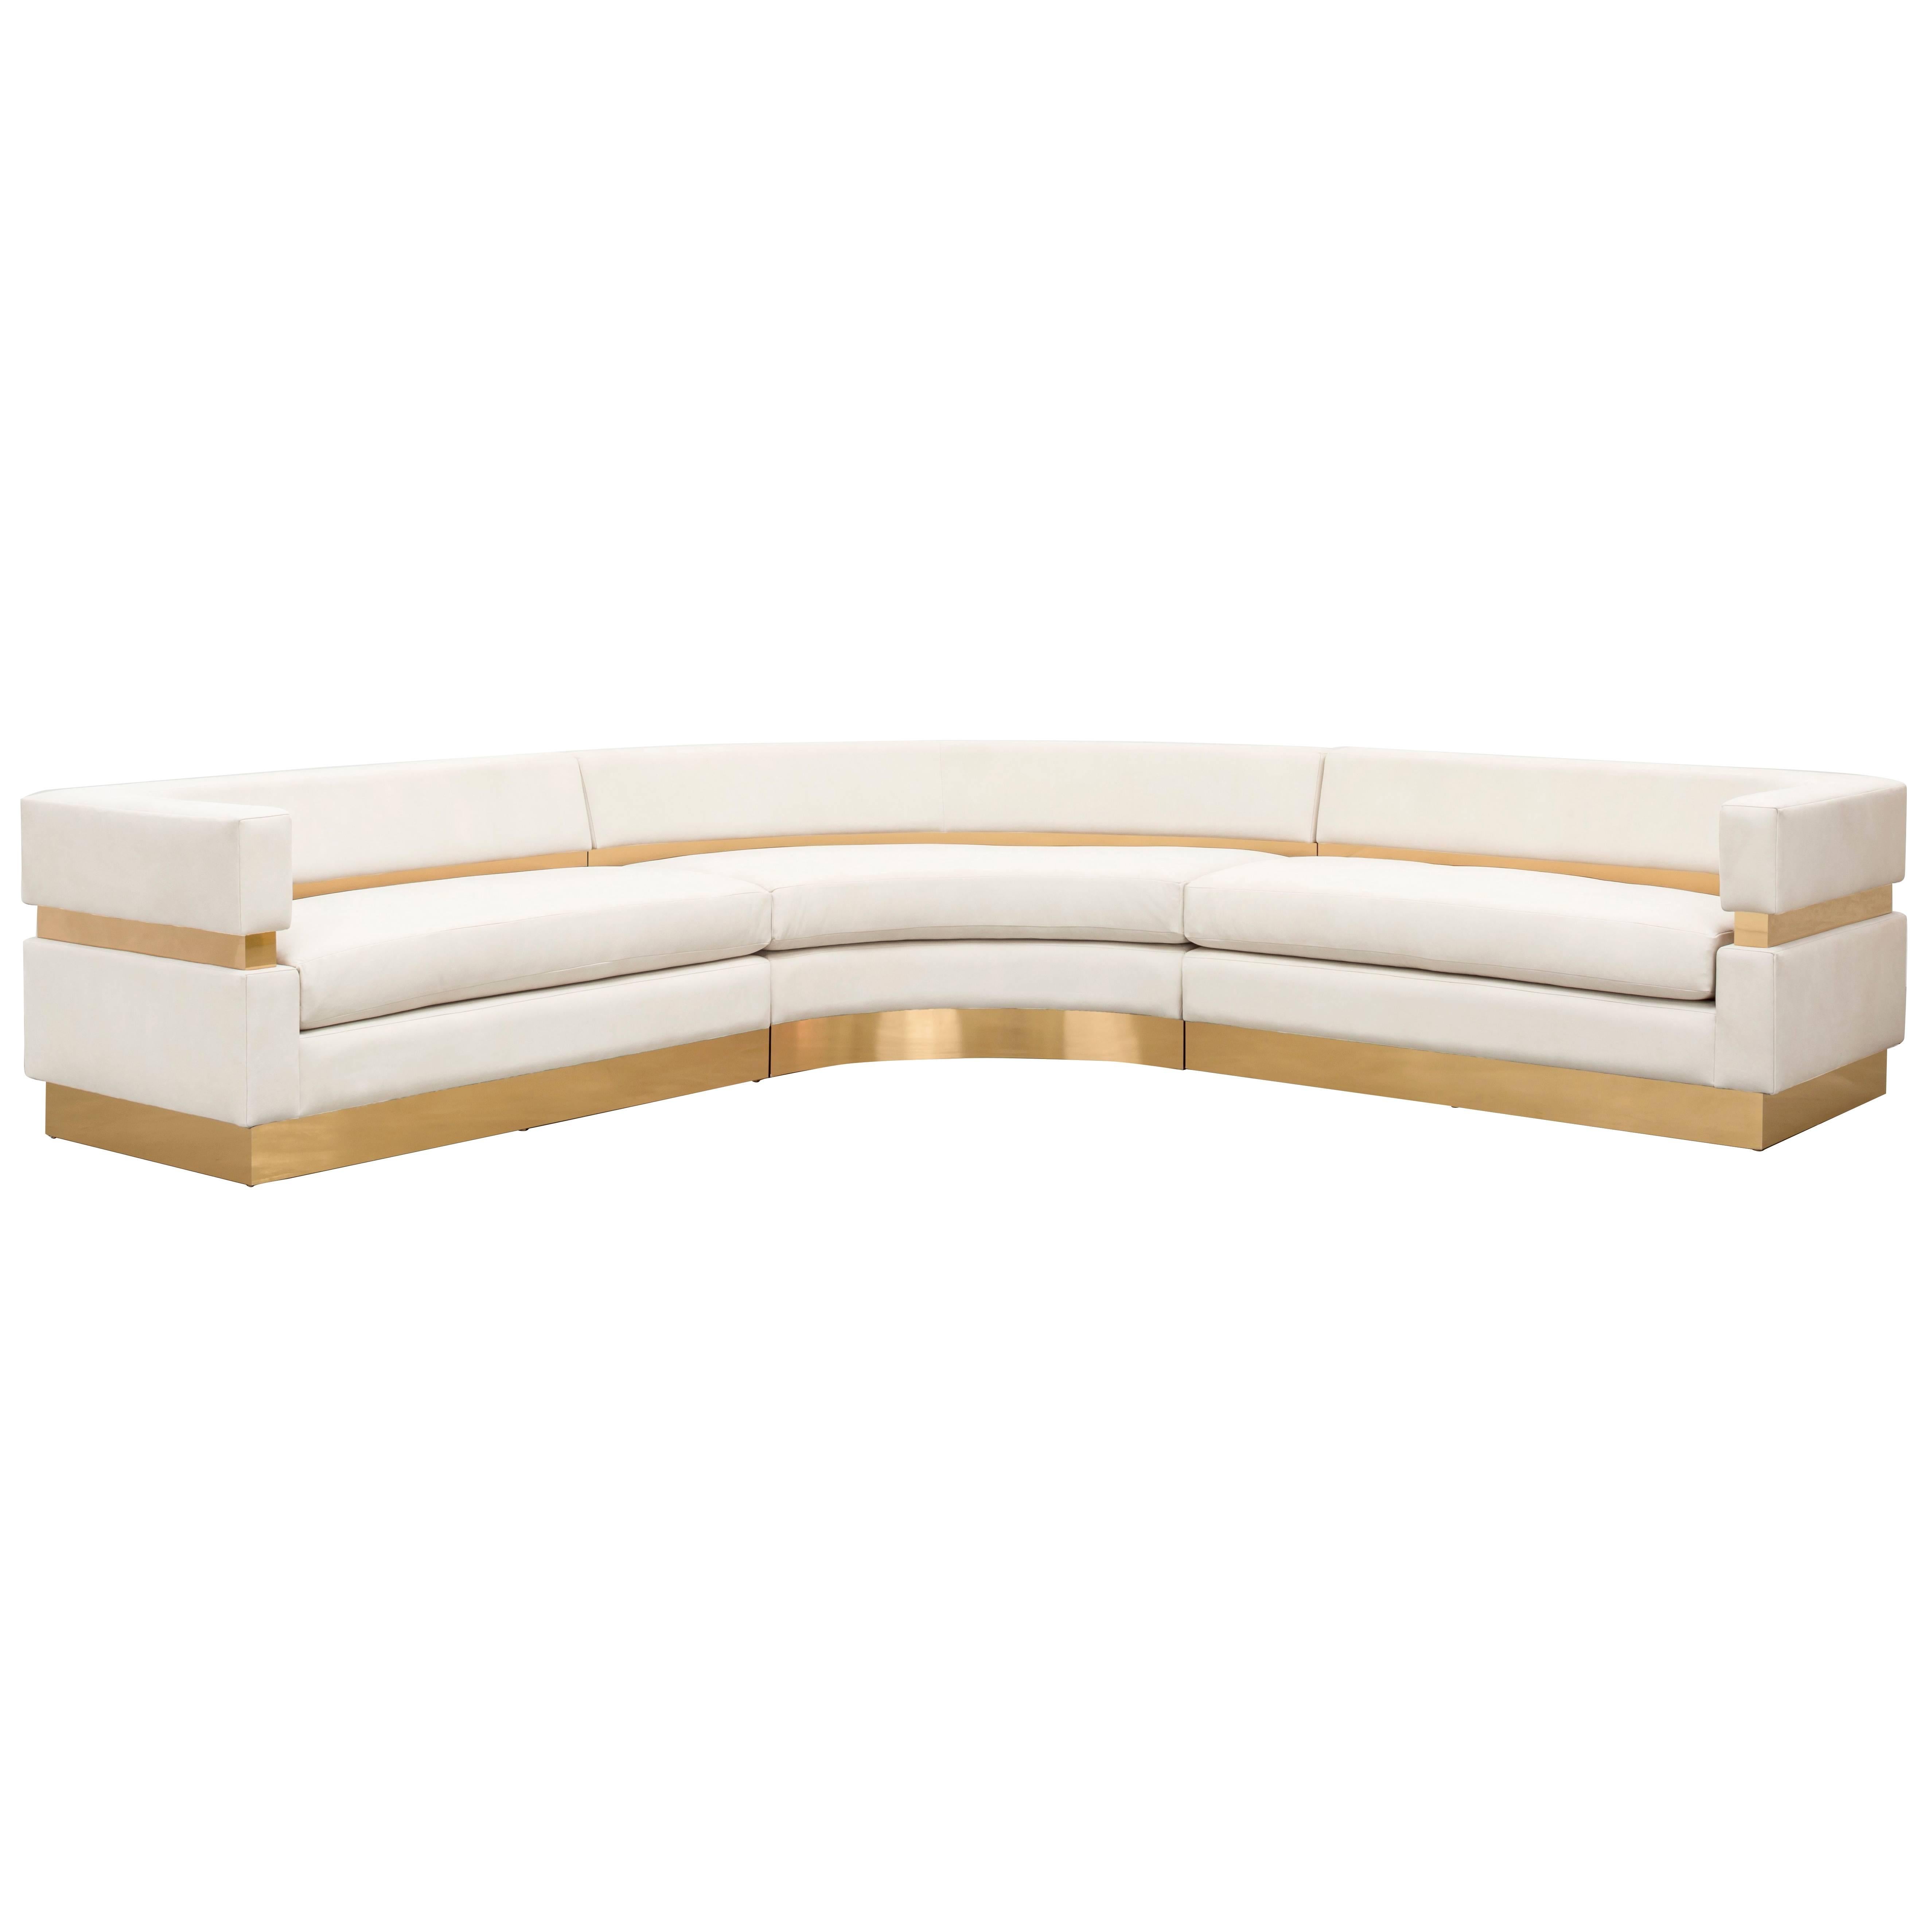 CARDIN SECTIONAL - Modern Leather Sectional Sofa with Metal Inlay and Base